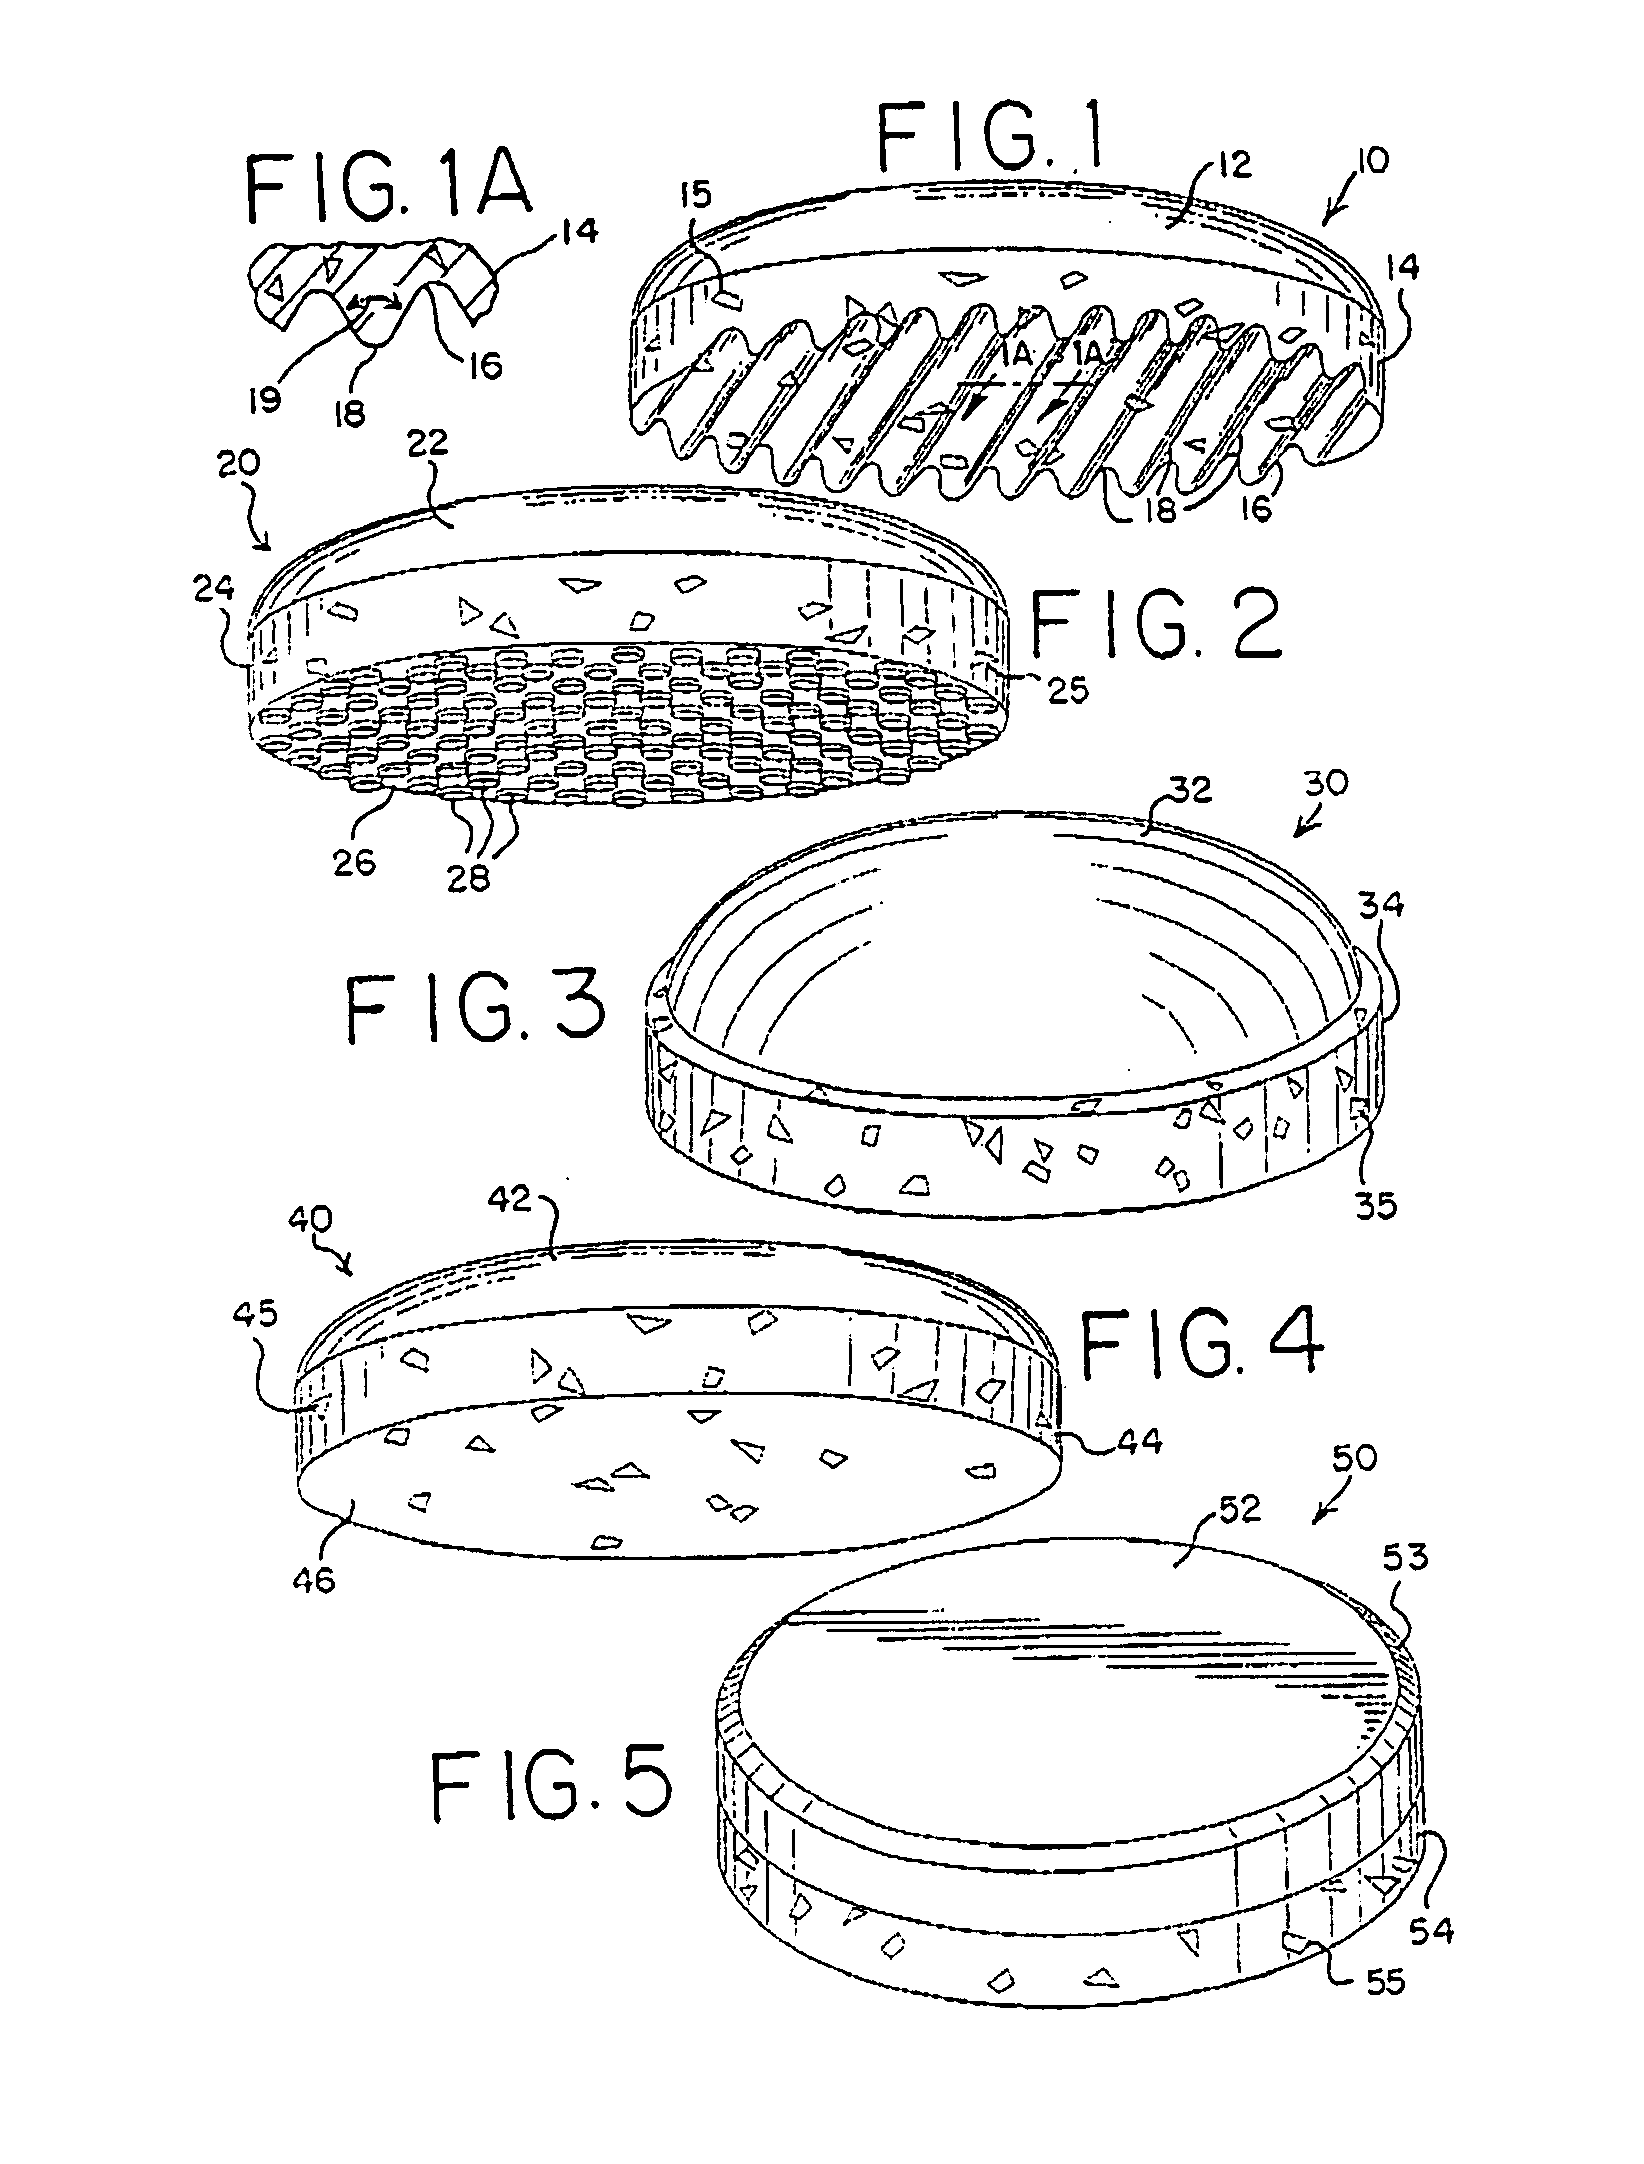 Breath freshening pressed tablets and methods of making and using same